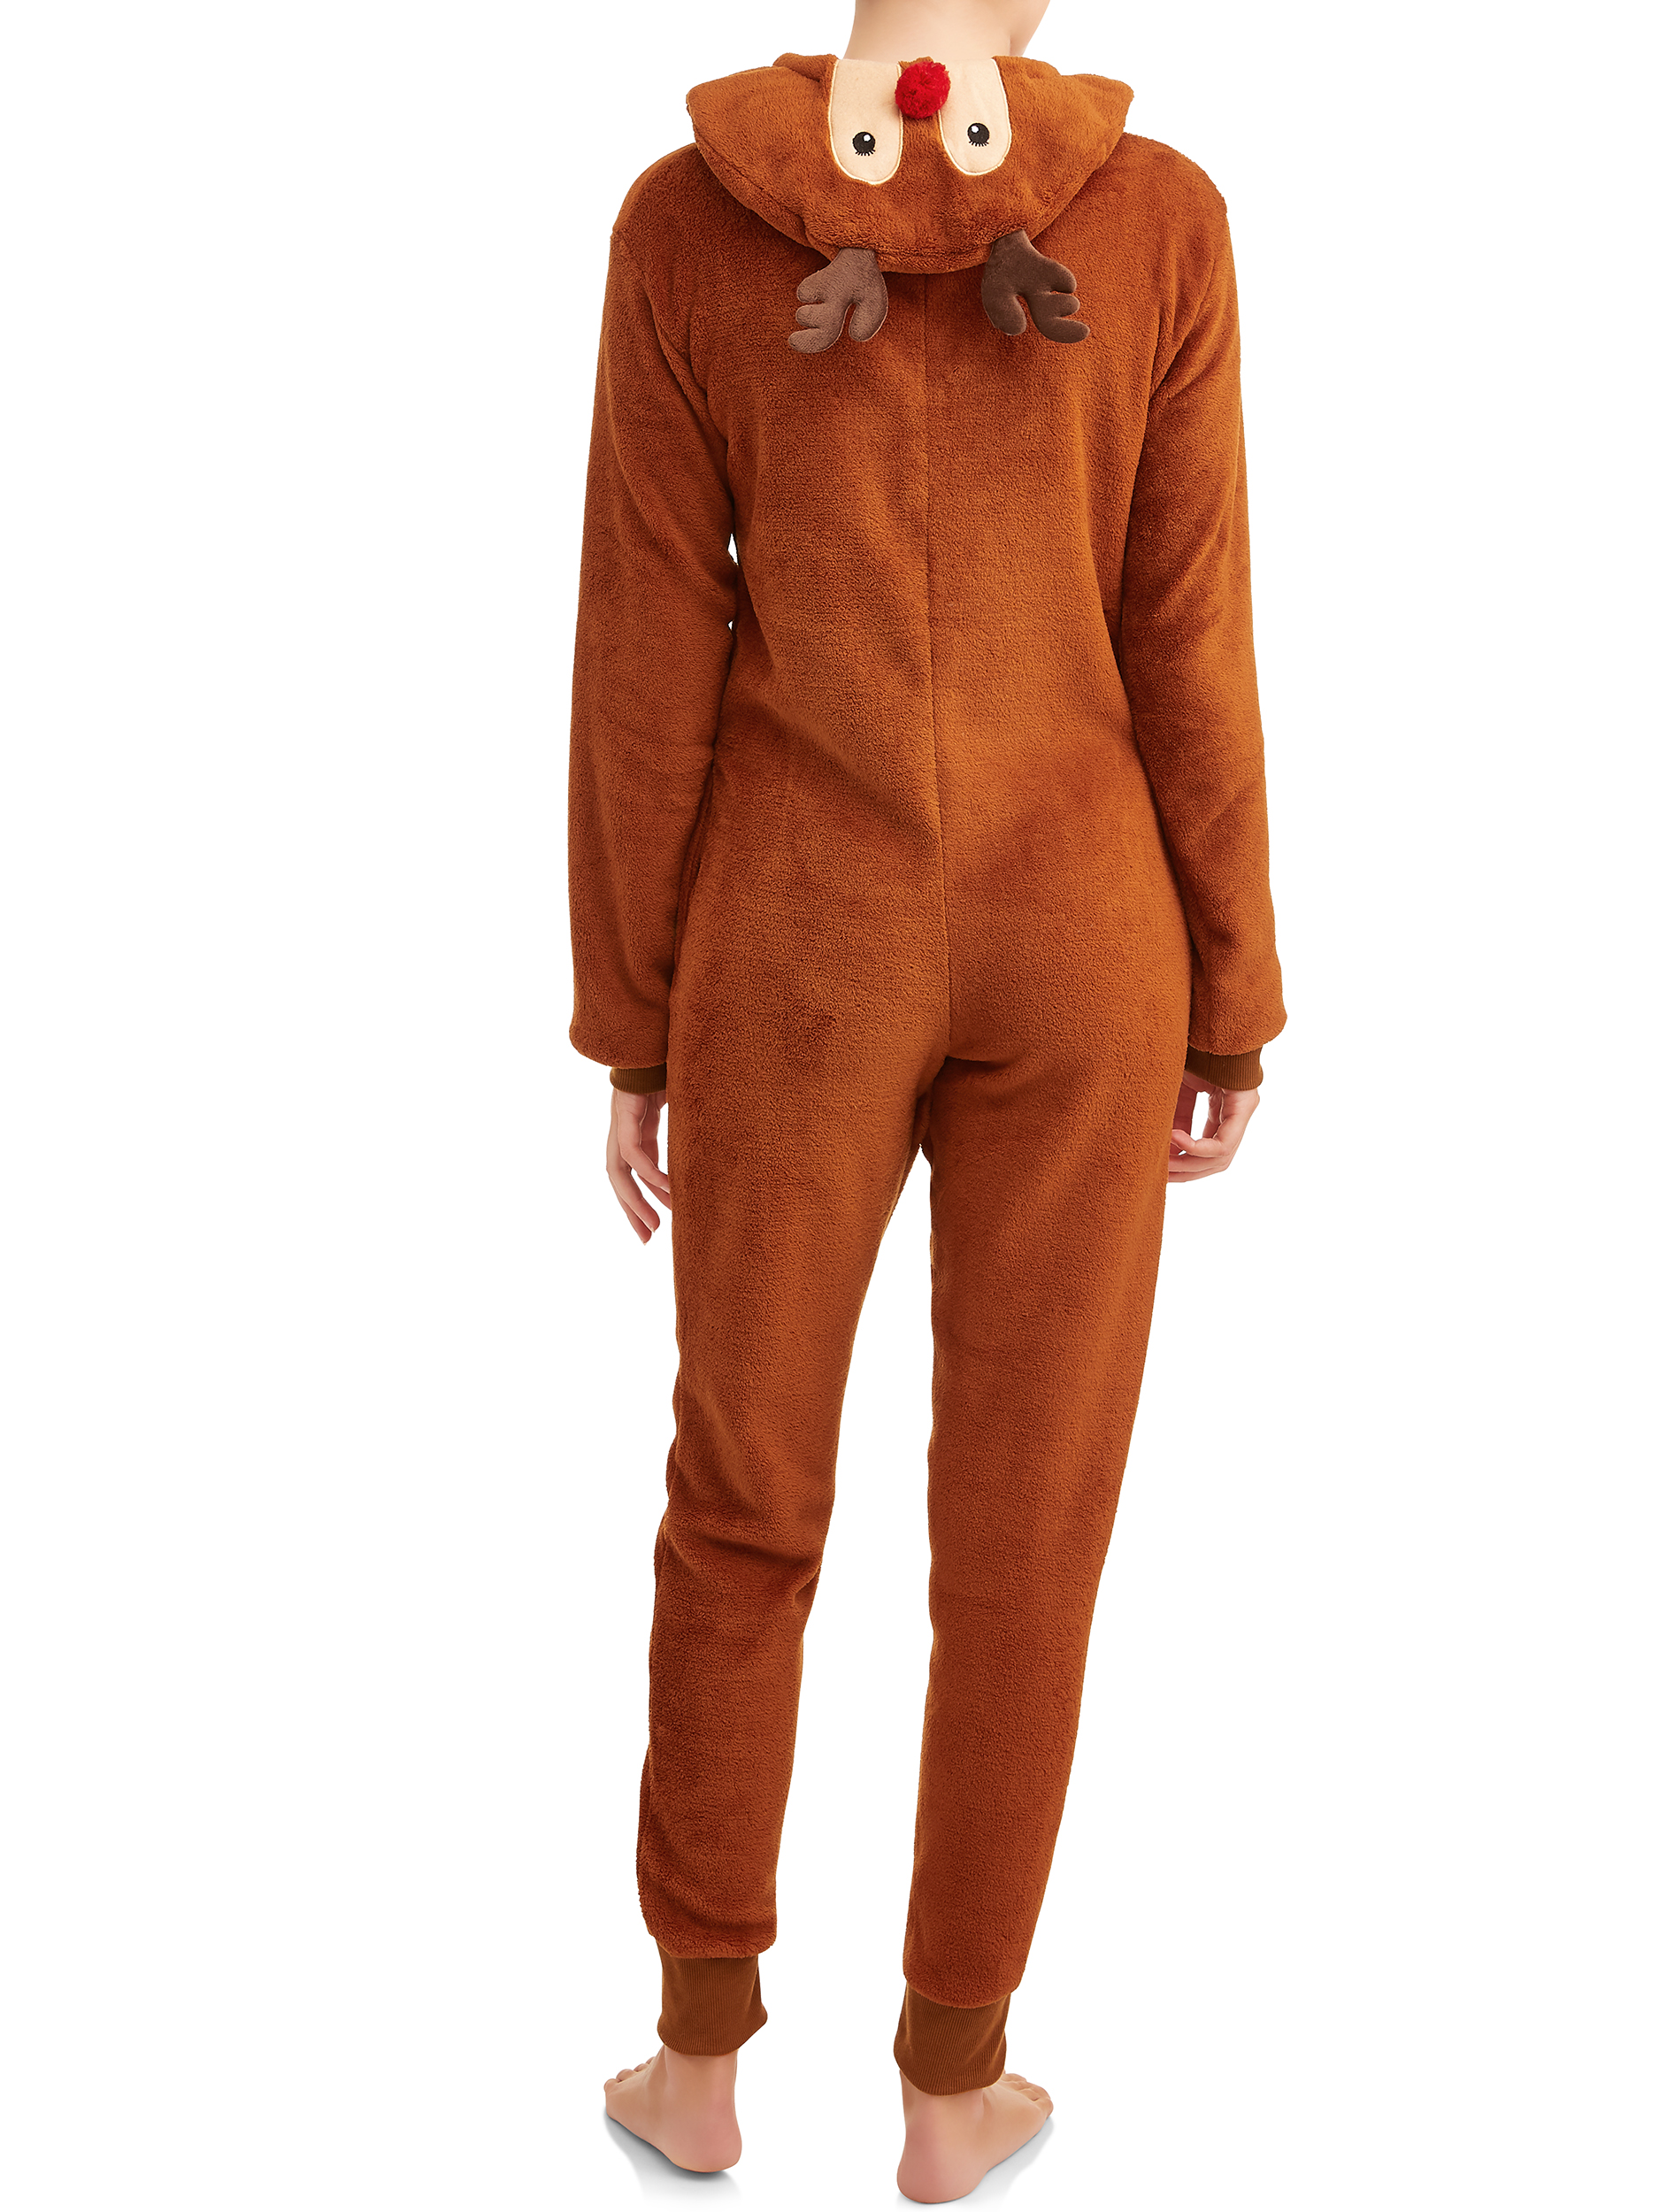 The Great Christmas Women's Christmas Edition Plush Hooded One Piece Union Suit - image 3 of 3